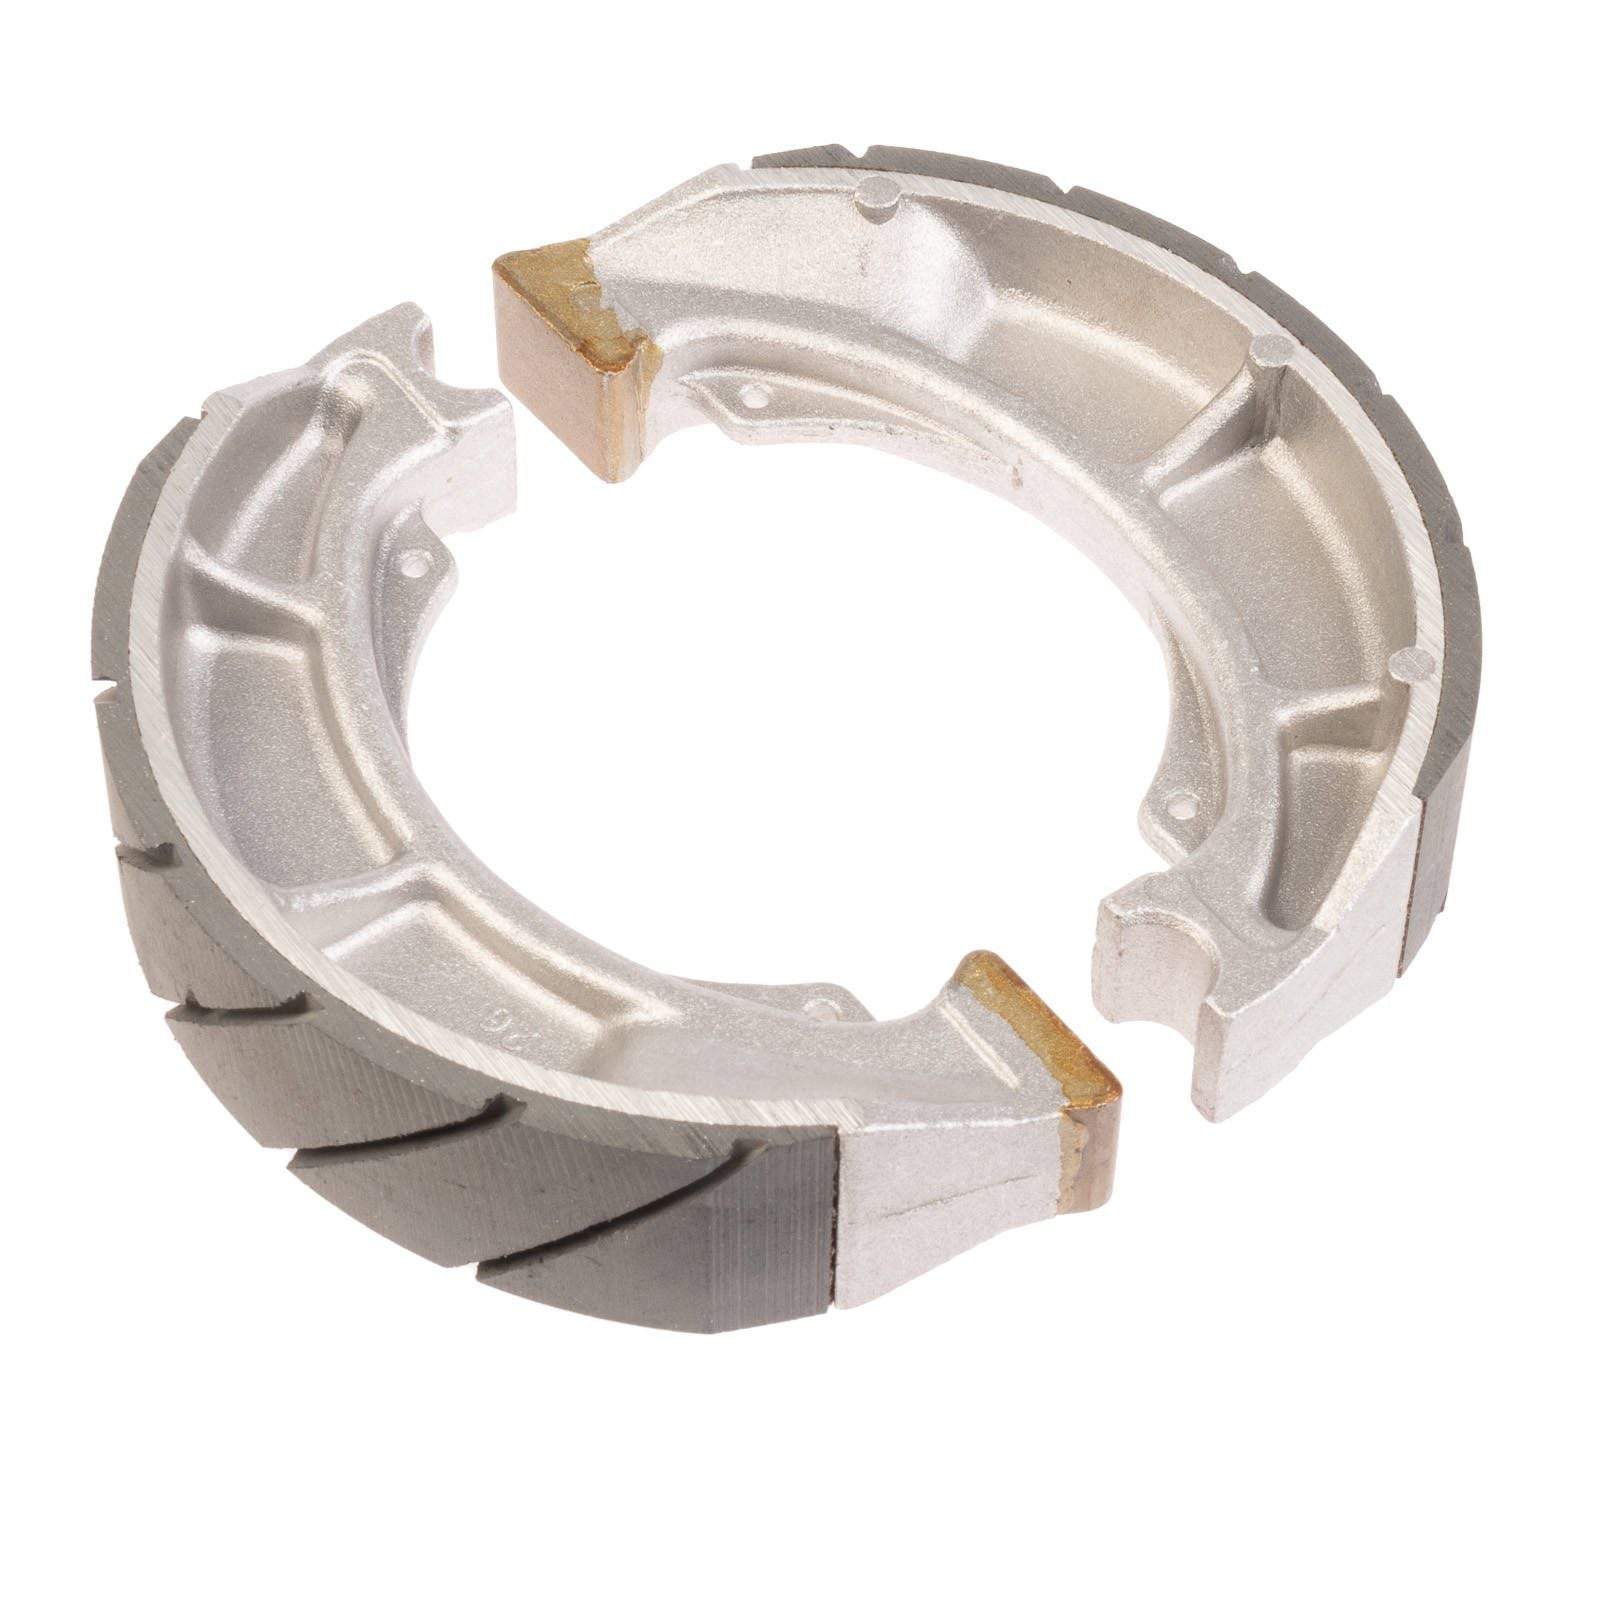 New WHITES Motorcycle Brake Shoes - Water Groove #WPBS41078